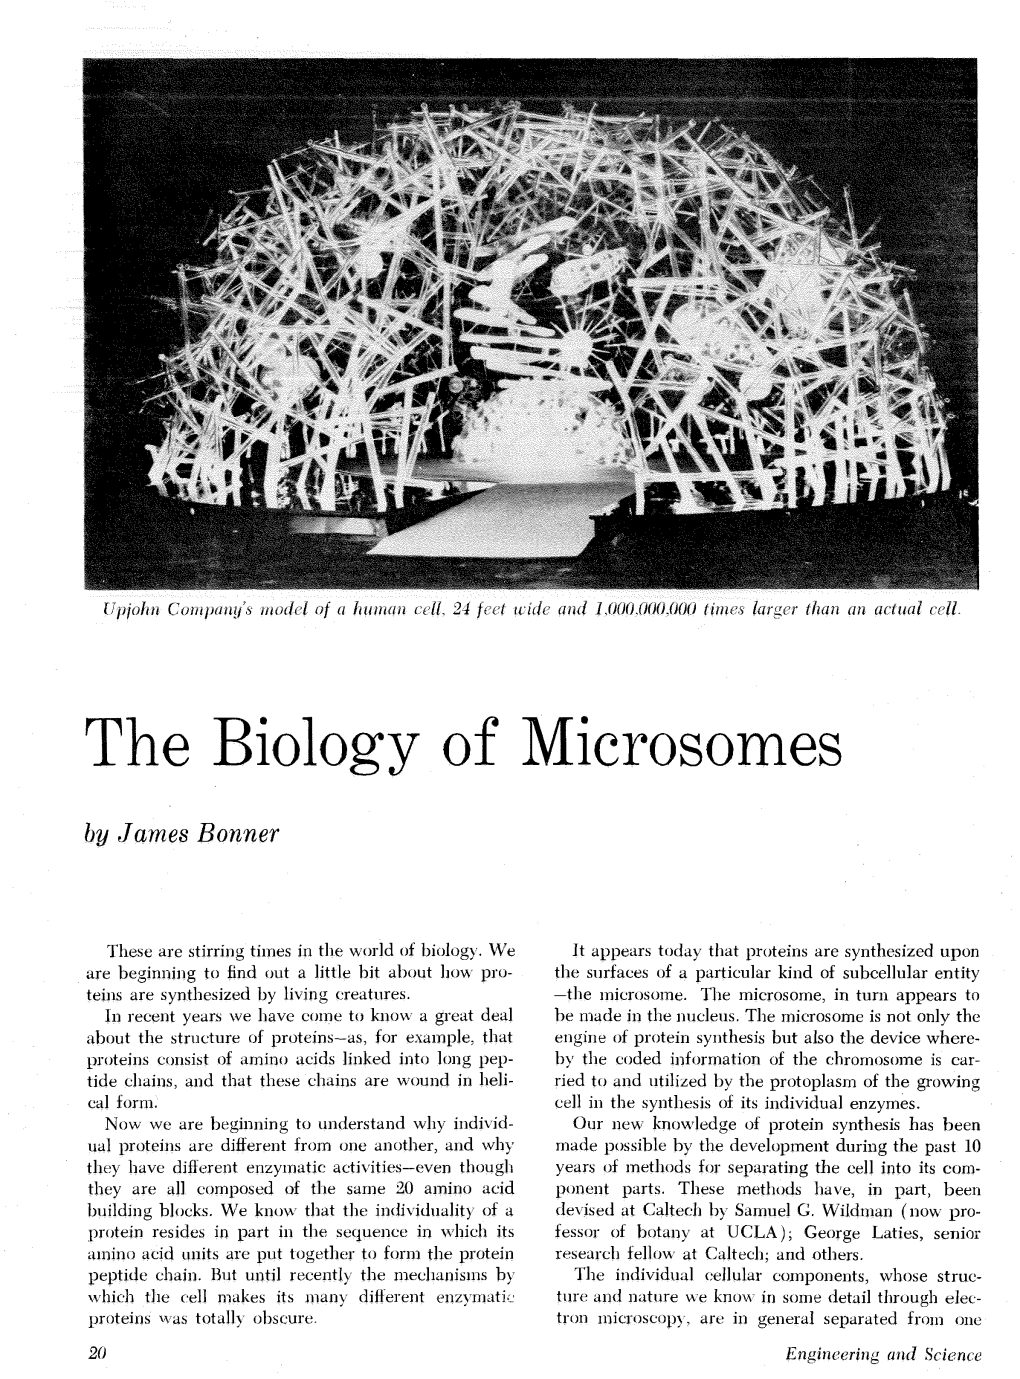 The Biology of Microsomes